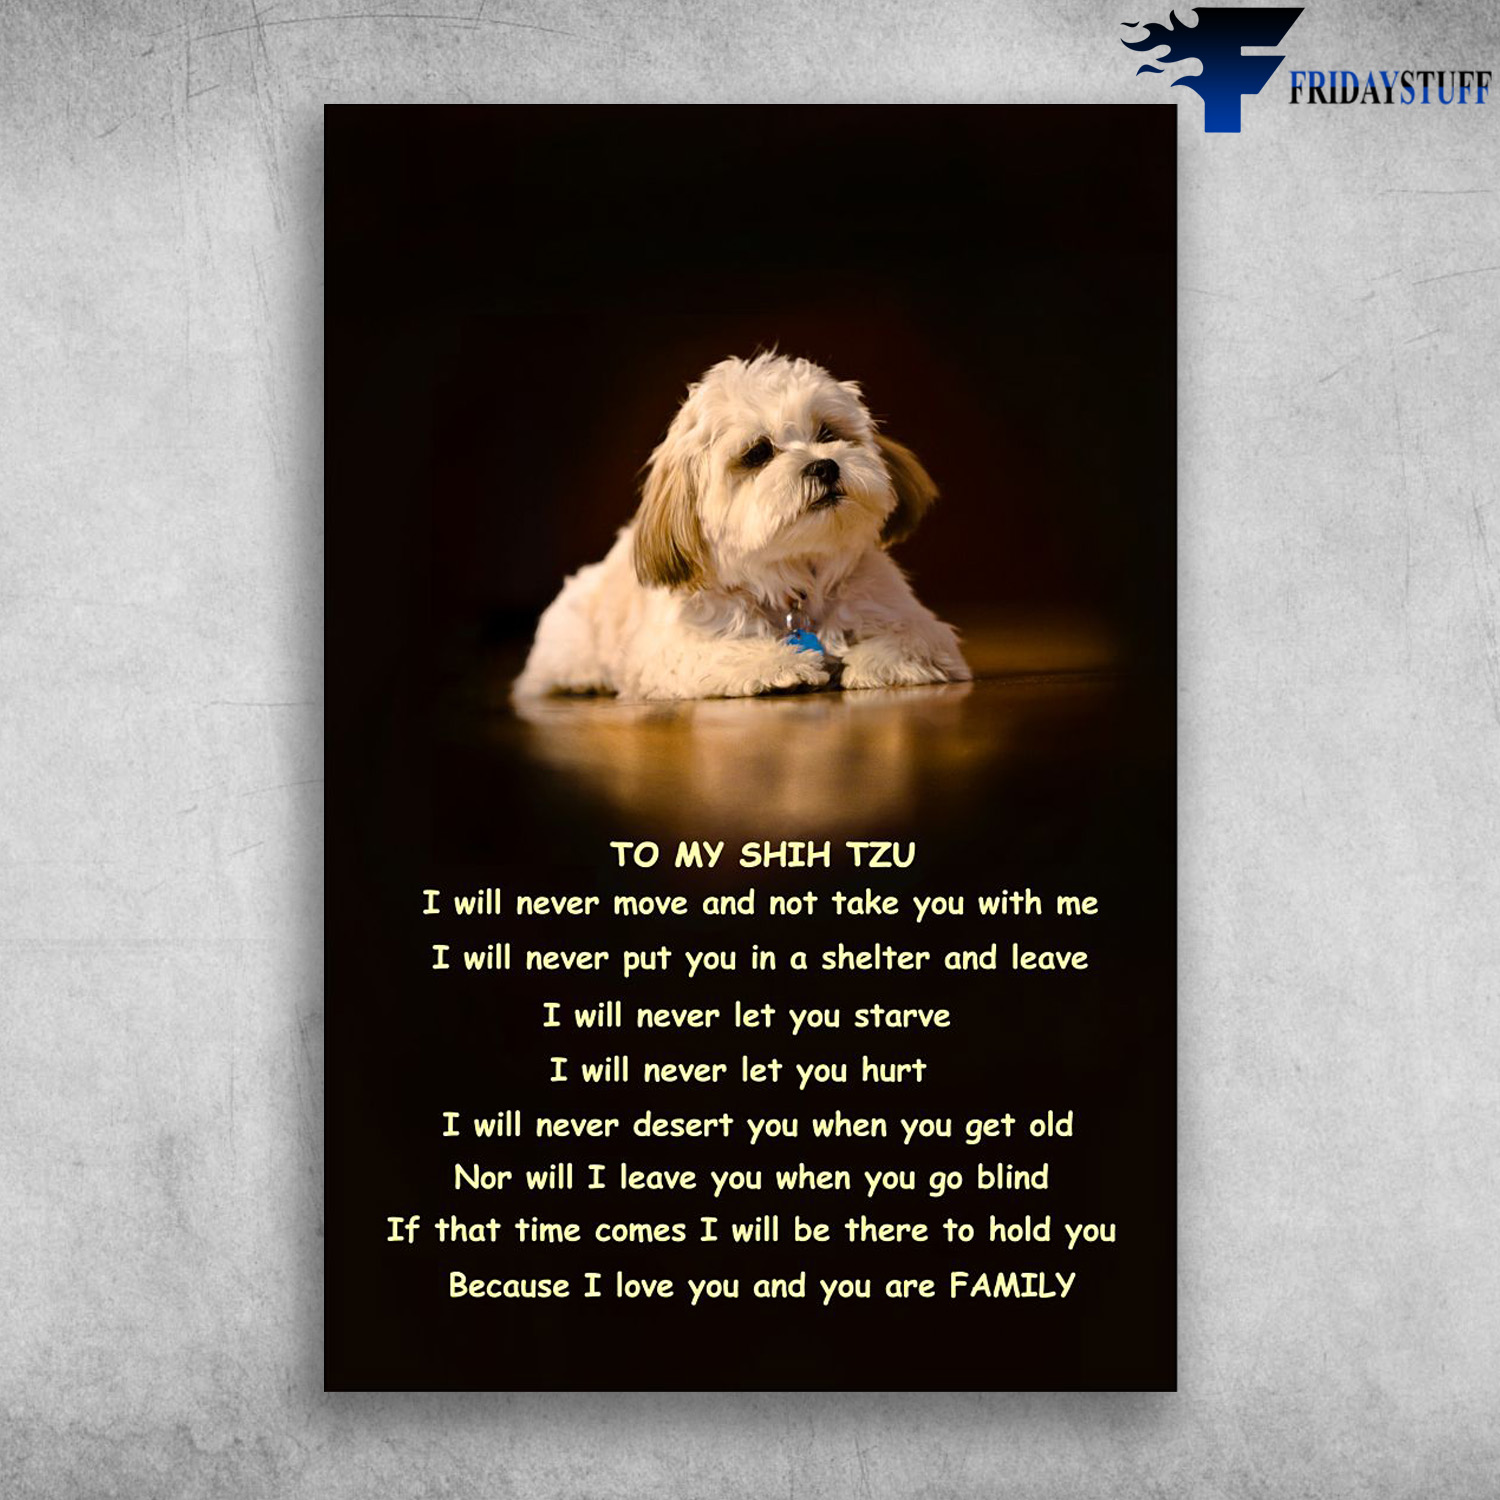 Shih Tzu Dog - To My Shih Tzu - I Will Never Move And Not Take You With Me, I Will Never Put You In A Shelter And Leave, I Will Never Let You Starve, I Will Never Let You Hurt